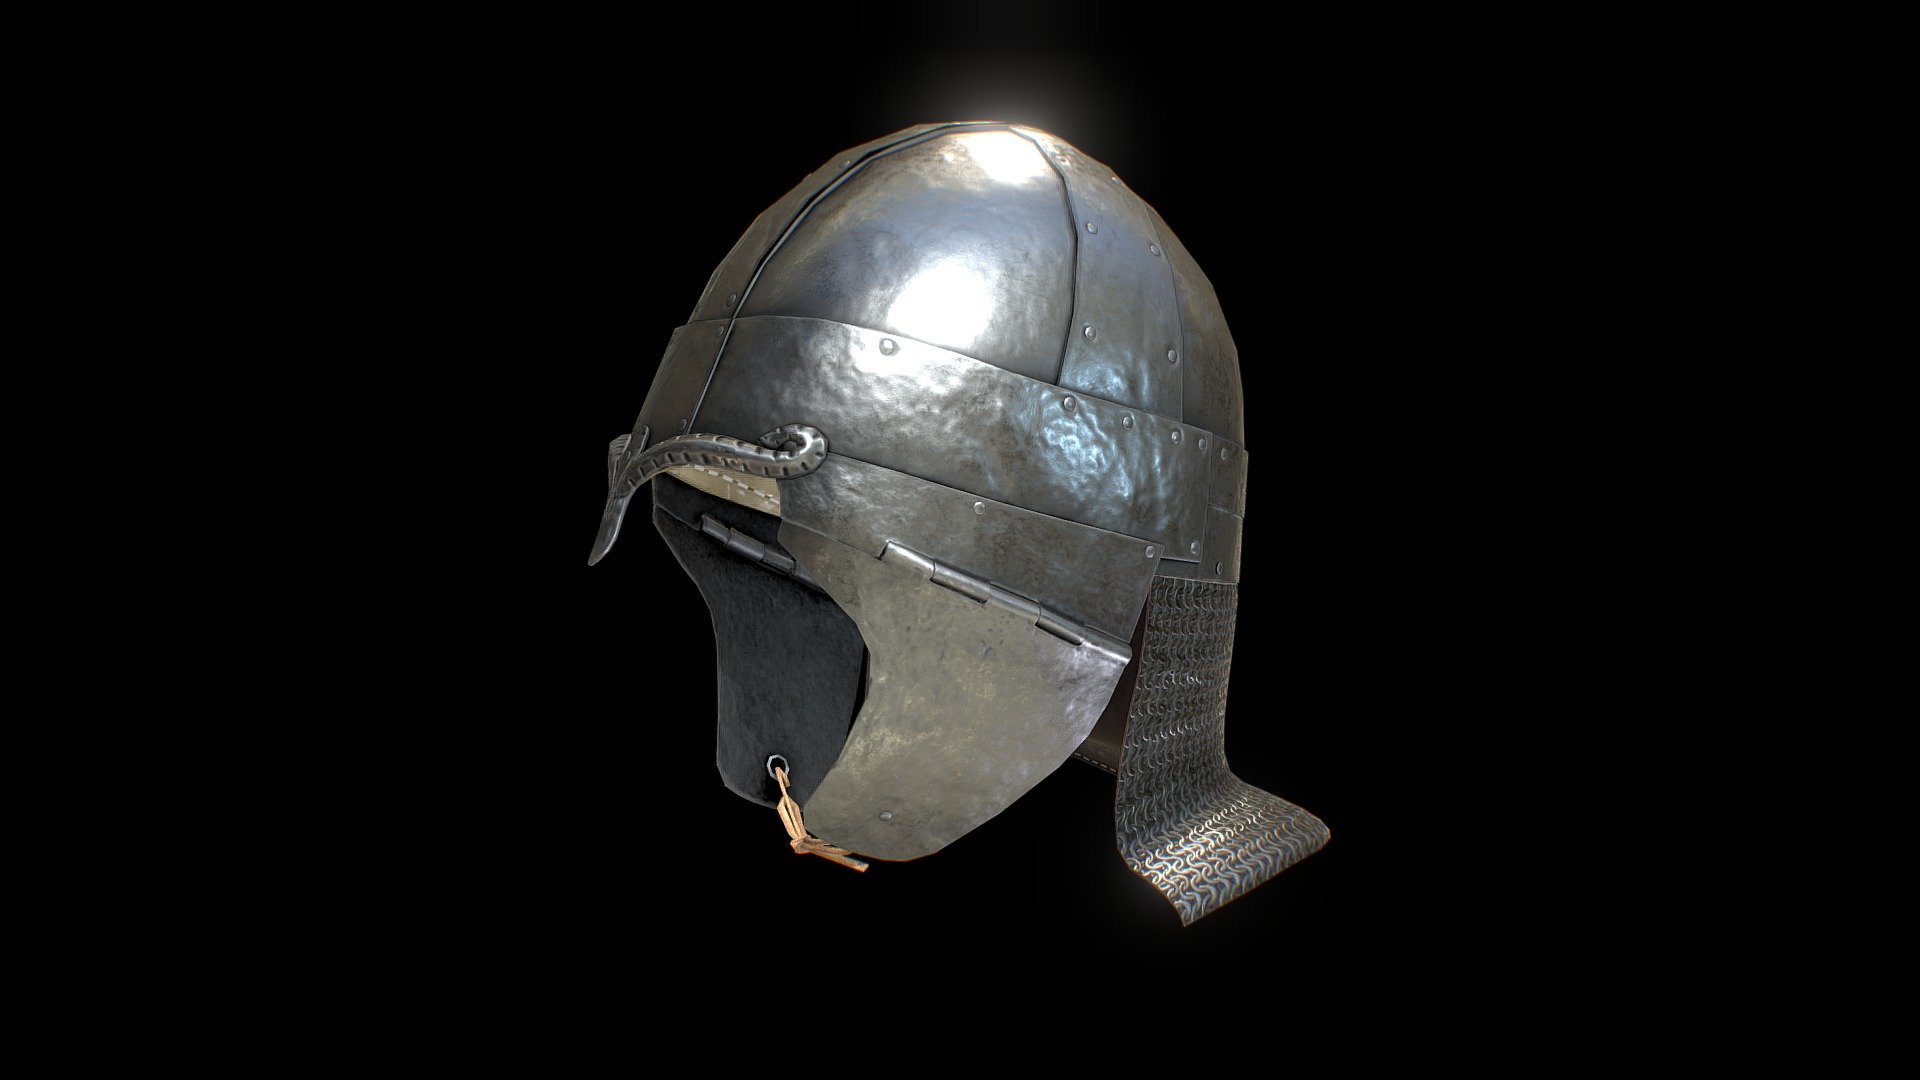 The helmet is iron, with a shape close to hemispherical, a small nosepiece, and small iron pads attached on hinges. The barmica is absent. The dome of the helmet is riveted from various sized rectangular and trapezoidal plates.

The height is 13.5 cm and the diameter at the base is 19.5 cm. The helmet was found in the feet of the buried man. Р. D. Goldina wrote about its similarity to the Kammhelm class helmet from Concepst (Moldavia), but this analogy can hardly be called too close, given the height of the dome and the presence of a crest on the latter.

Source: https://late-roman.ru/arheologicheskiy-katalog/drugie-neopredelyonnye-tipy/tri-shlema-iz-tarasovskogo-mogilnika/ - Taravosky #6 - Eastern Helmet - Buy Royalty Free 3D model by Davicolt 3d model